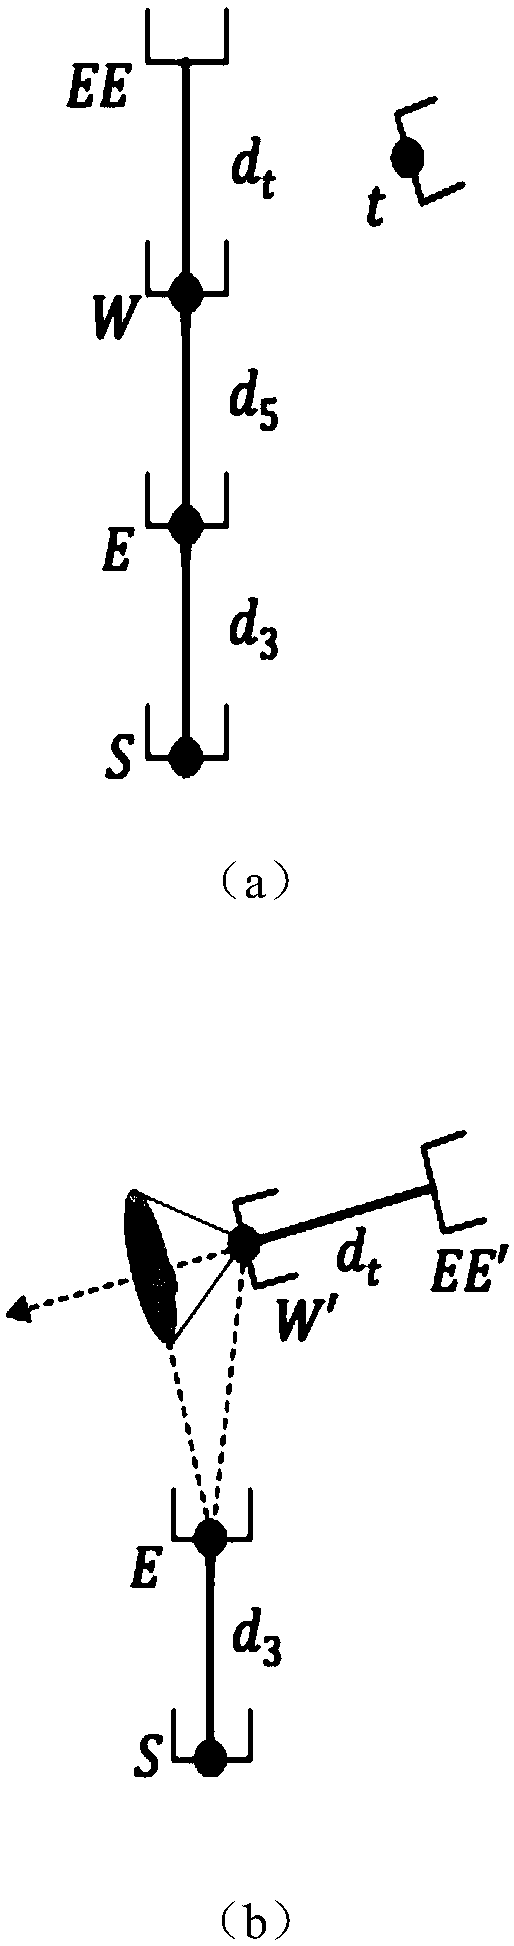 Movement control method of six-degree-of-freedom wrist offset type serial mechanical arm